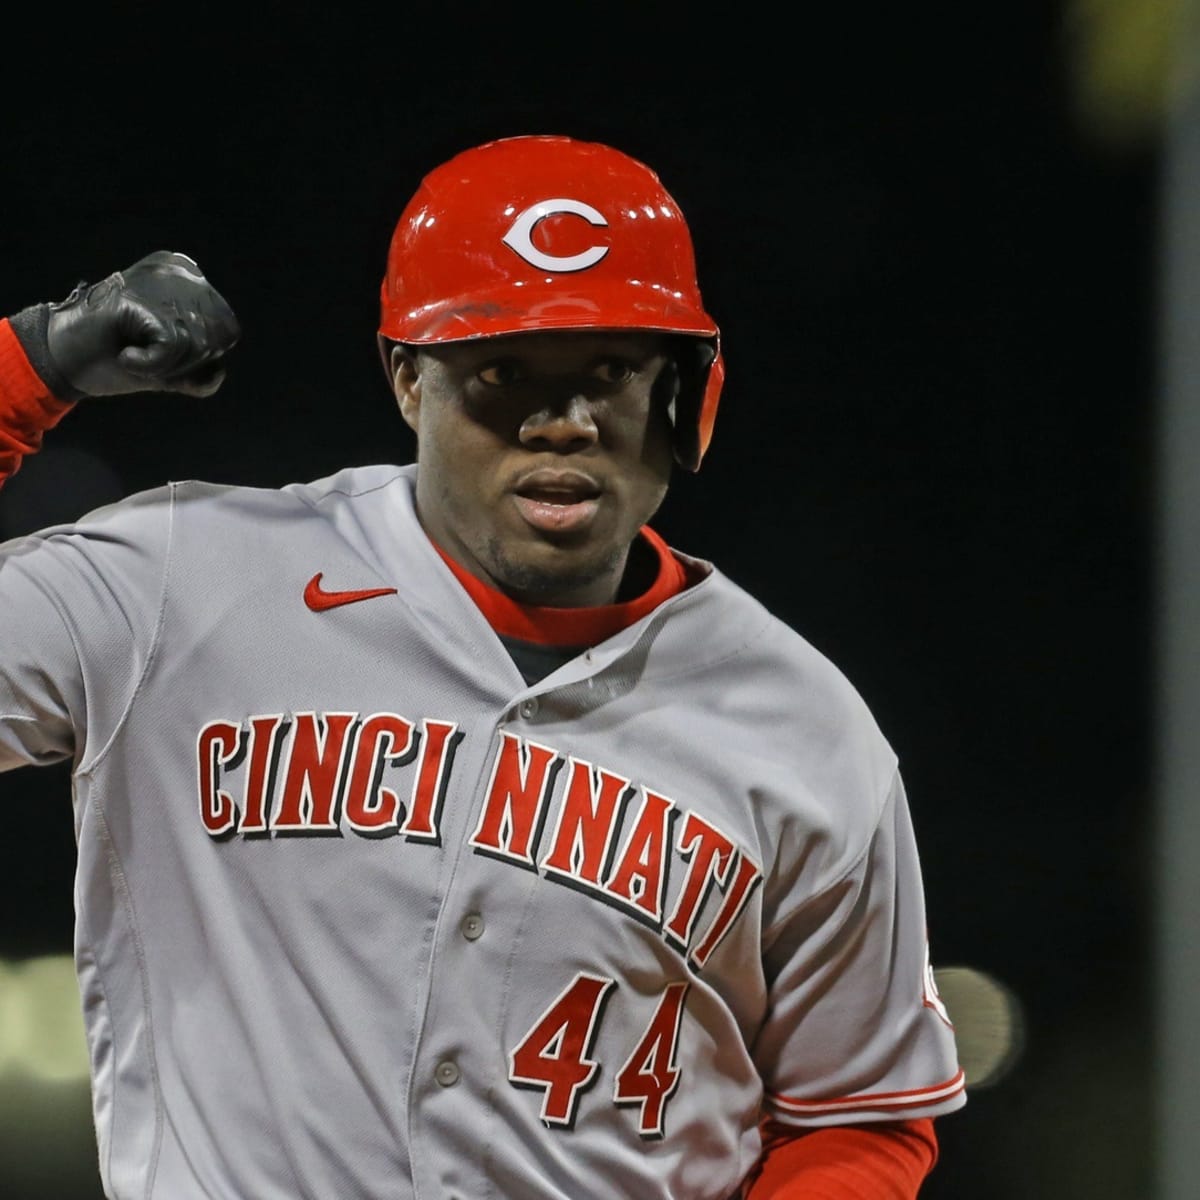 Aristides Aquino pulled from lineup, joining the Reds